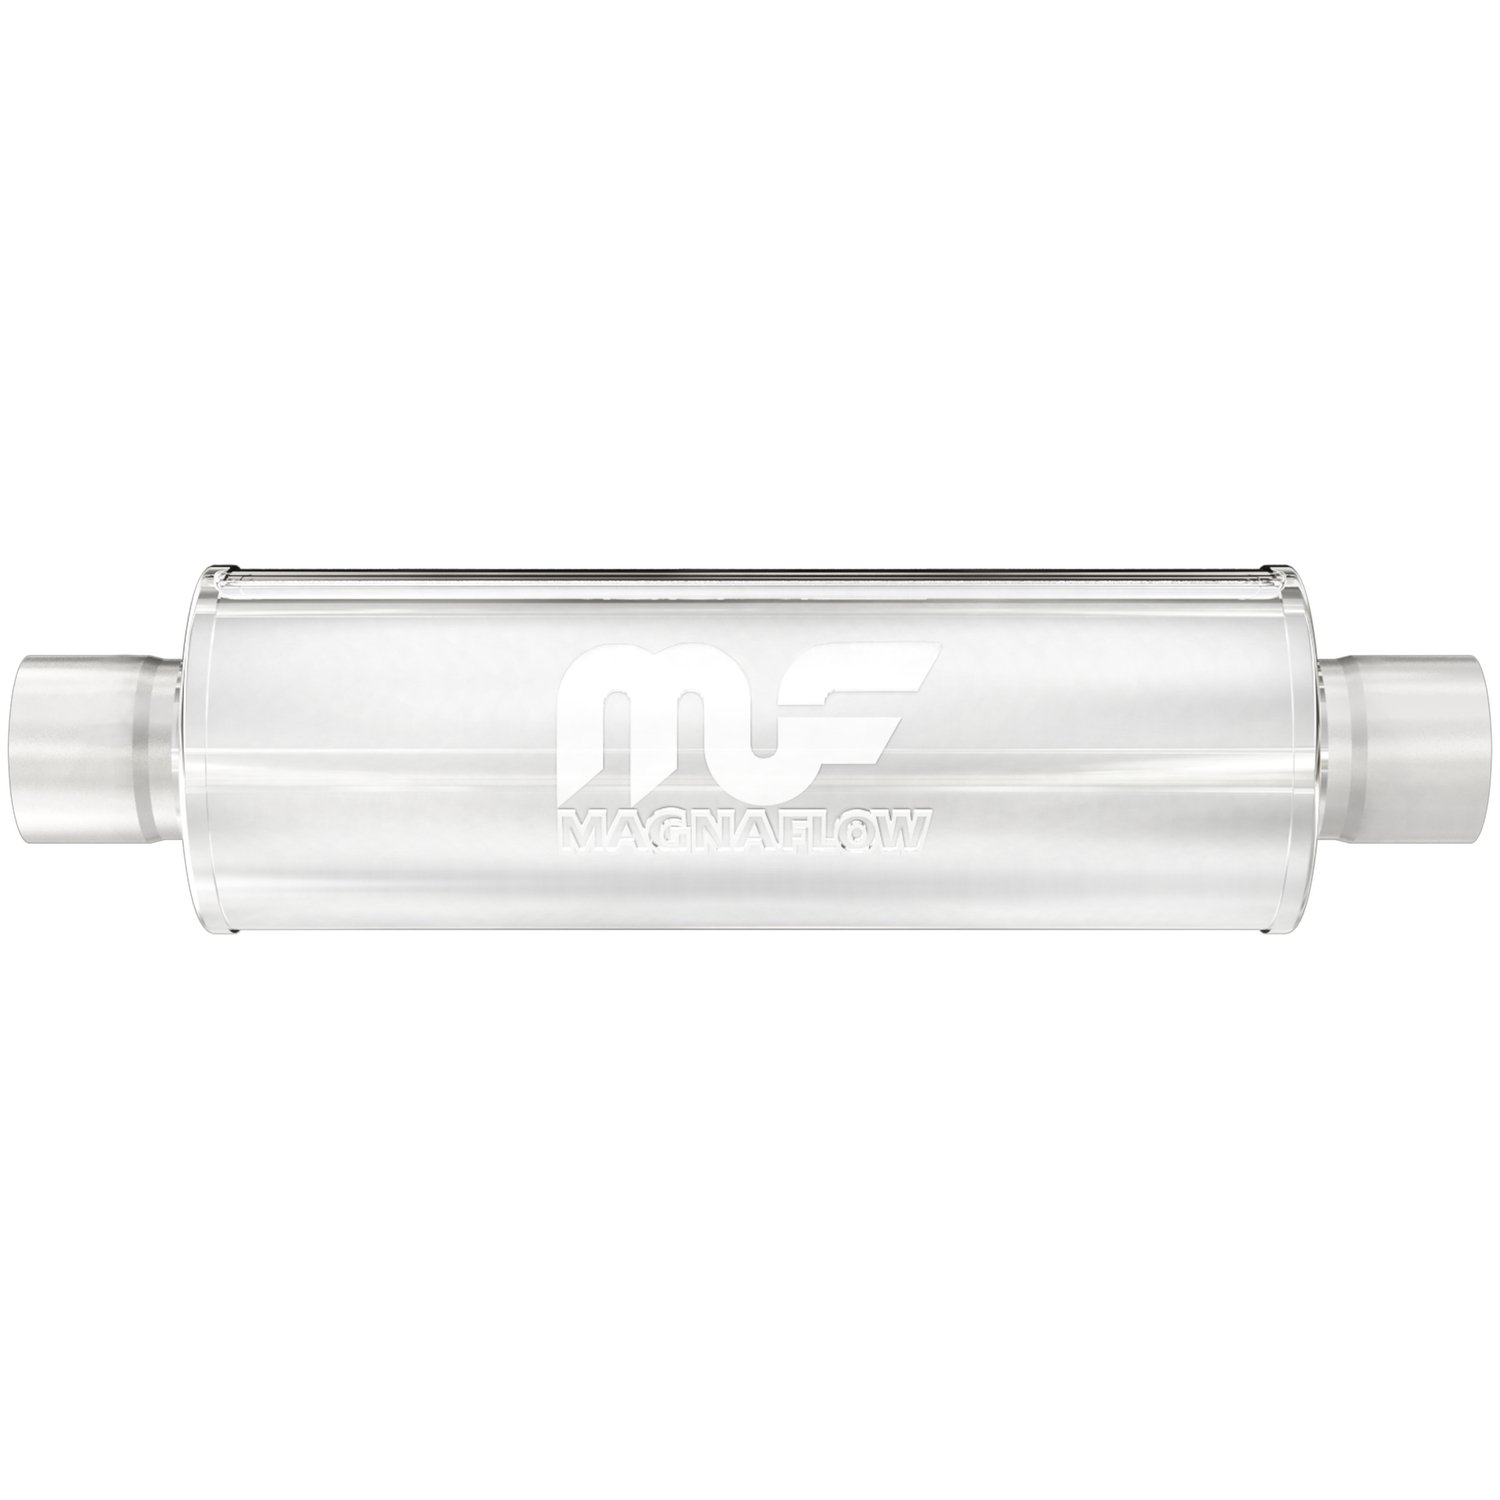 6" Round Muffler Center In/Center Out: 2" Body Length: 14" Overall Length: 20" Core Size: 2.5" Satin Finish